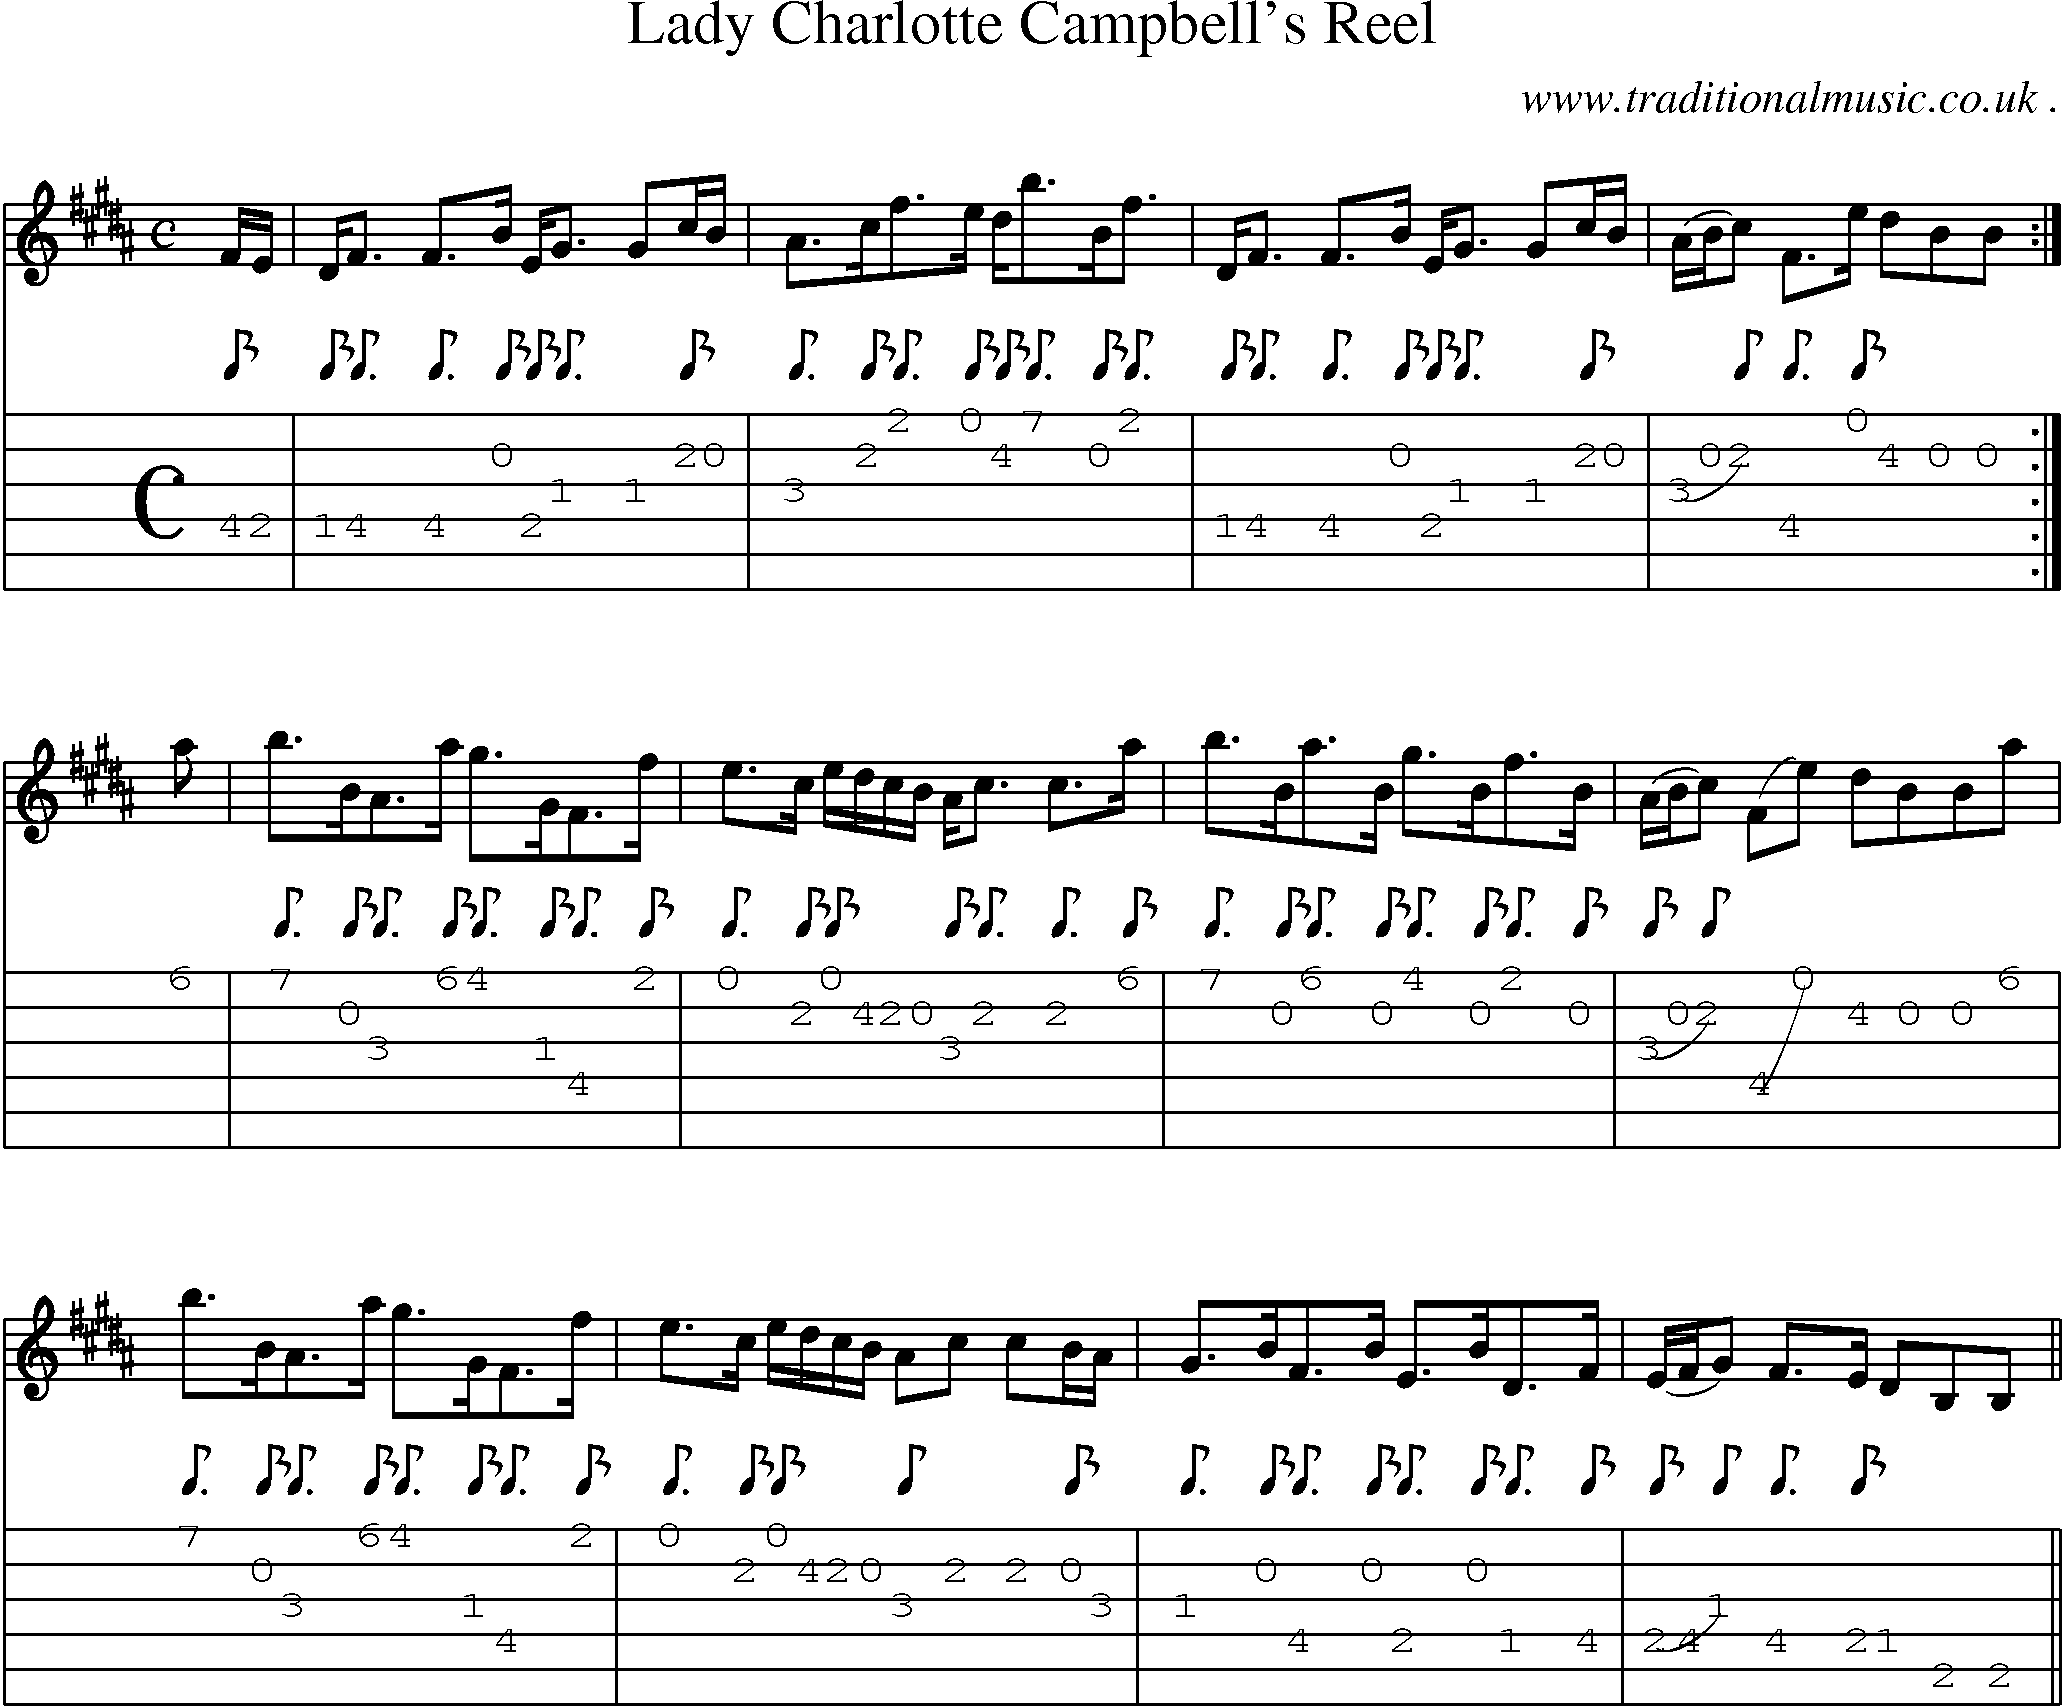 Sheet-music  score, Chords and Guitar Tabs for Lady Charlotte Campbells Reel